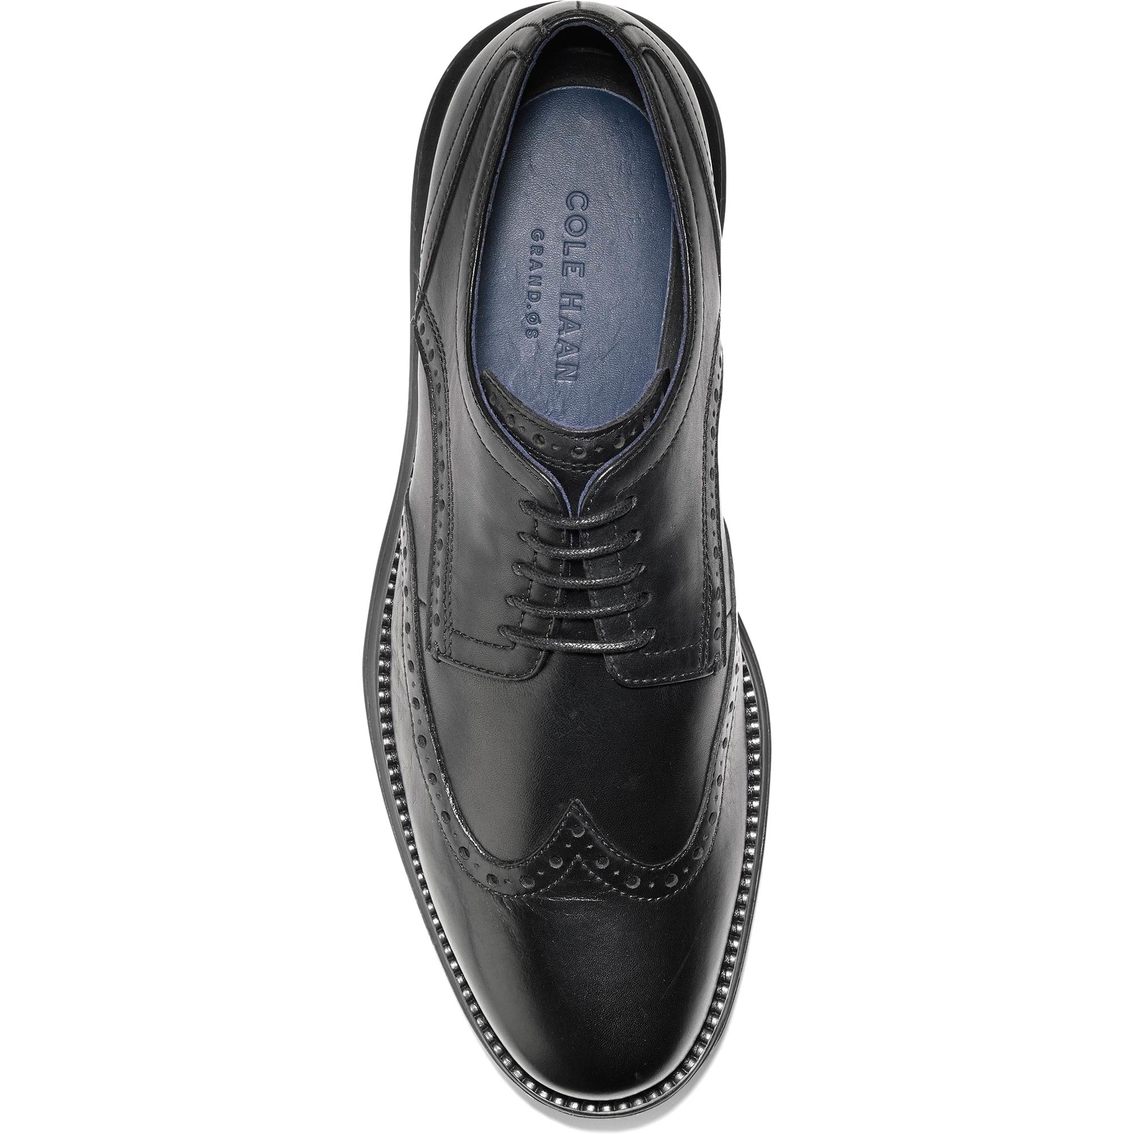 Cole Haan Original Grand Wingtip Oxford Shoes - Image 4 of 5